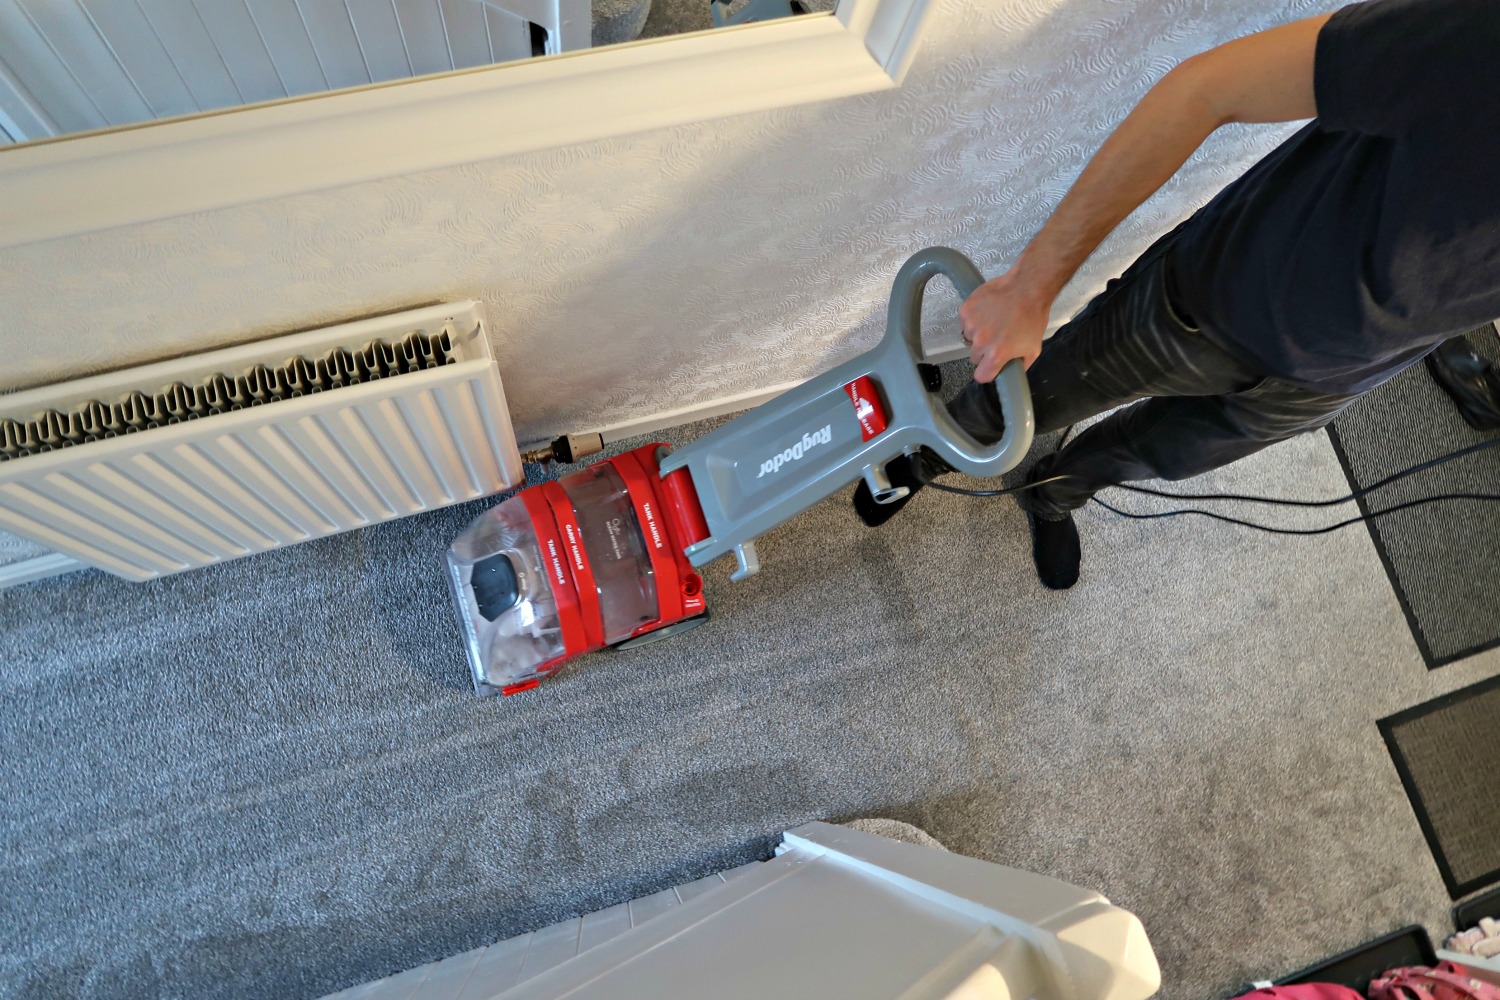 Rug-doctor-in-use Rug Doctor Deep Carpet Cleaner Review (Guest Blog by Life With Pink Princesses)